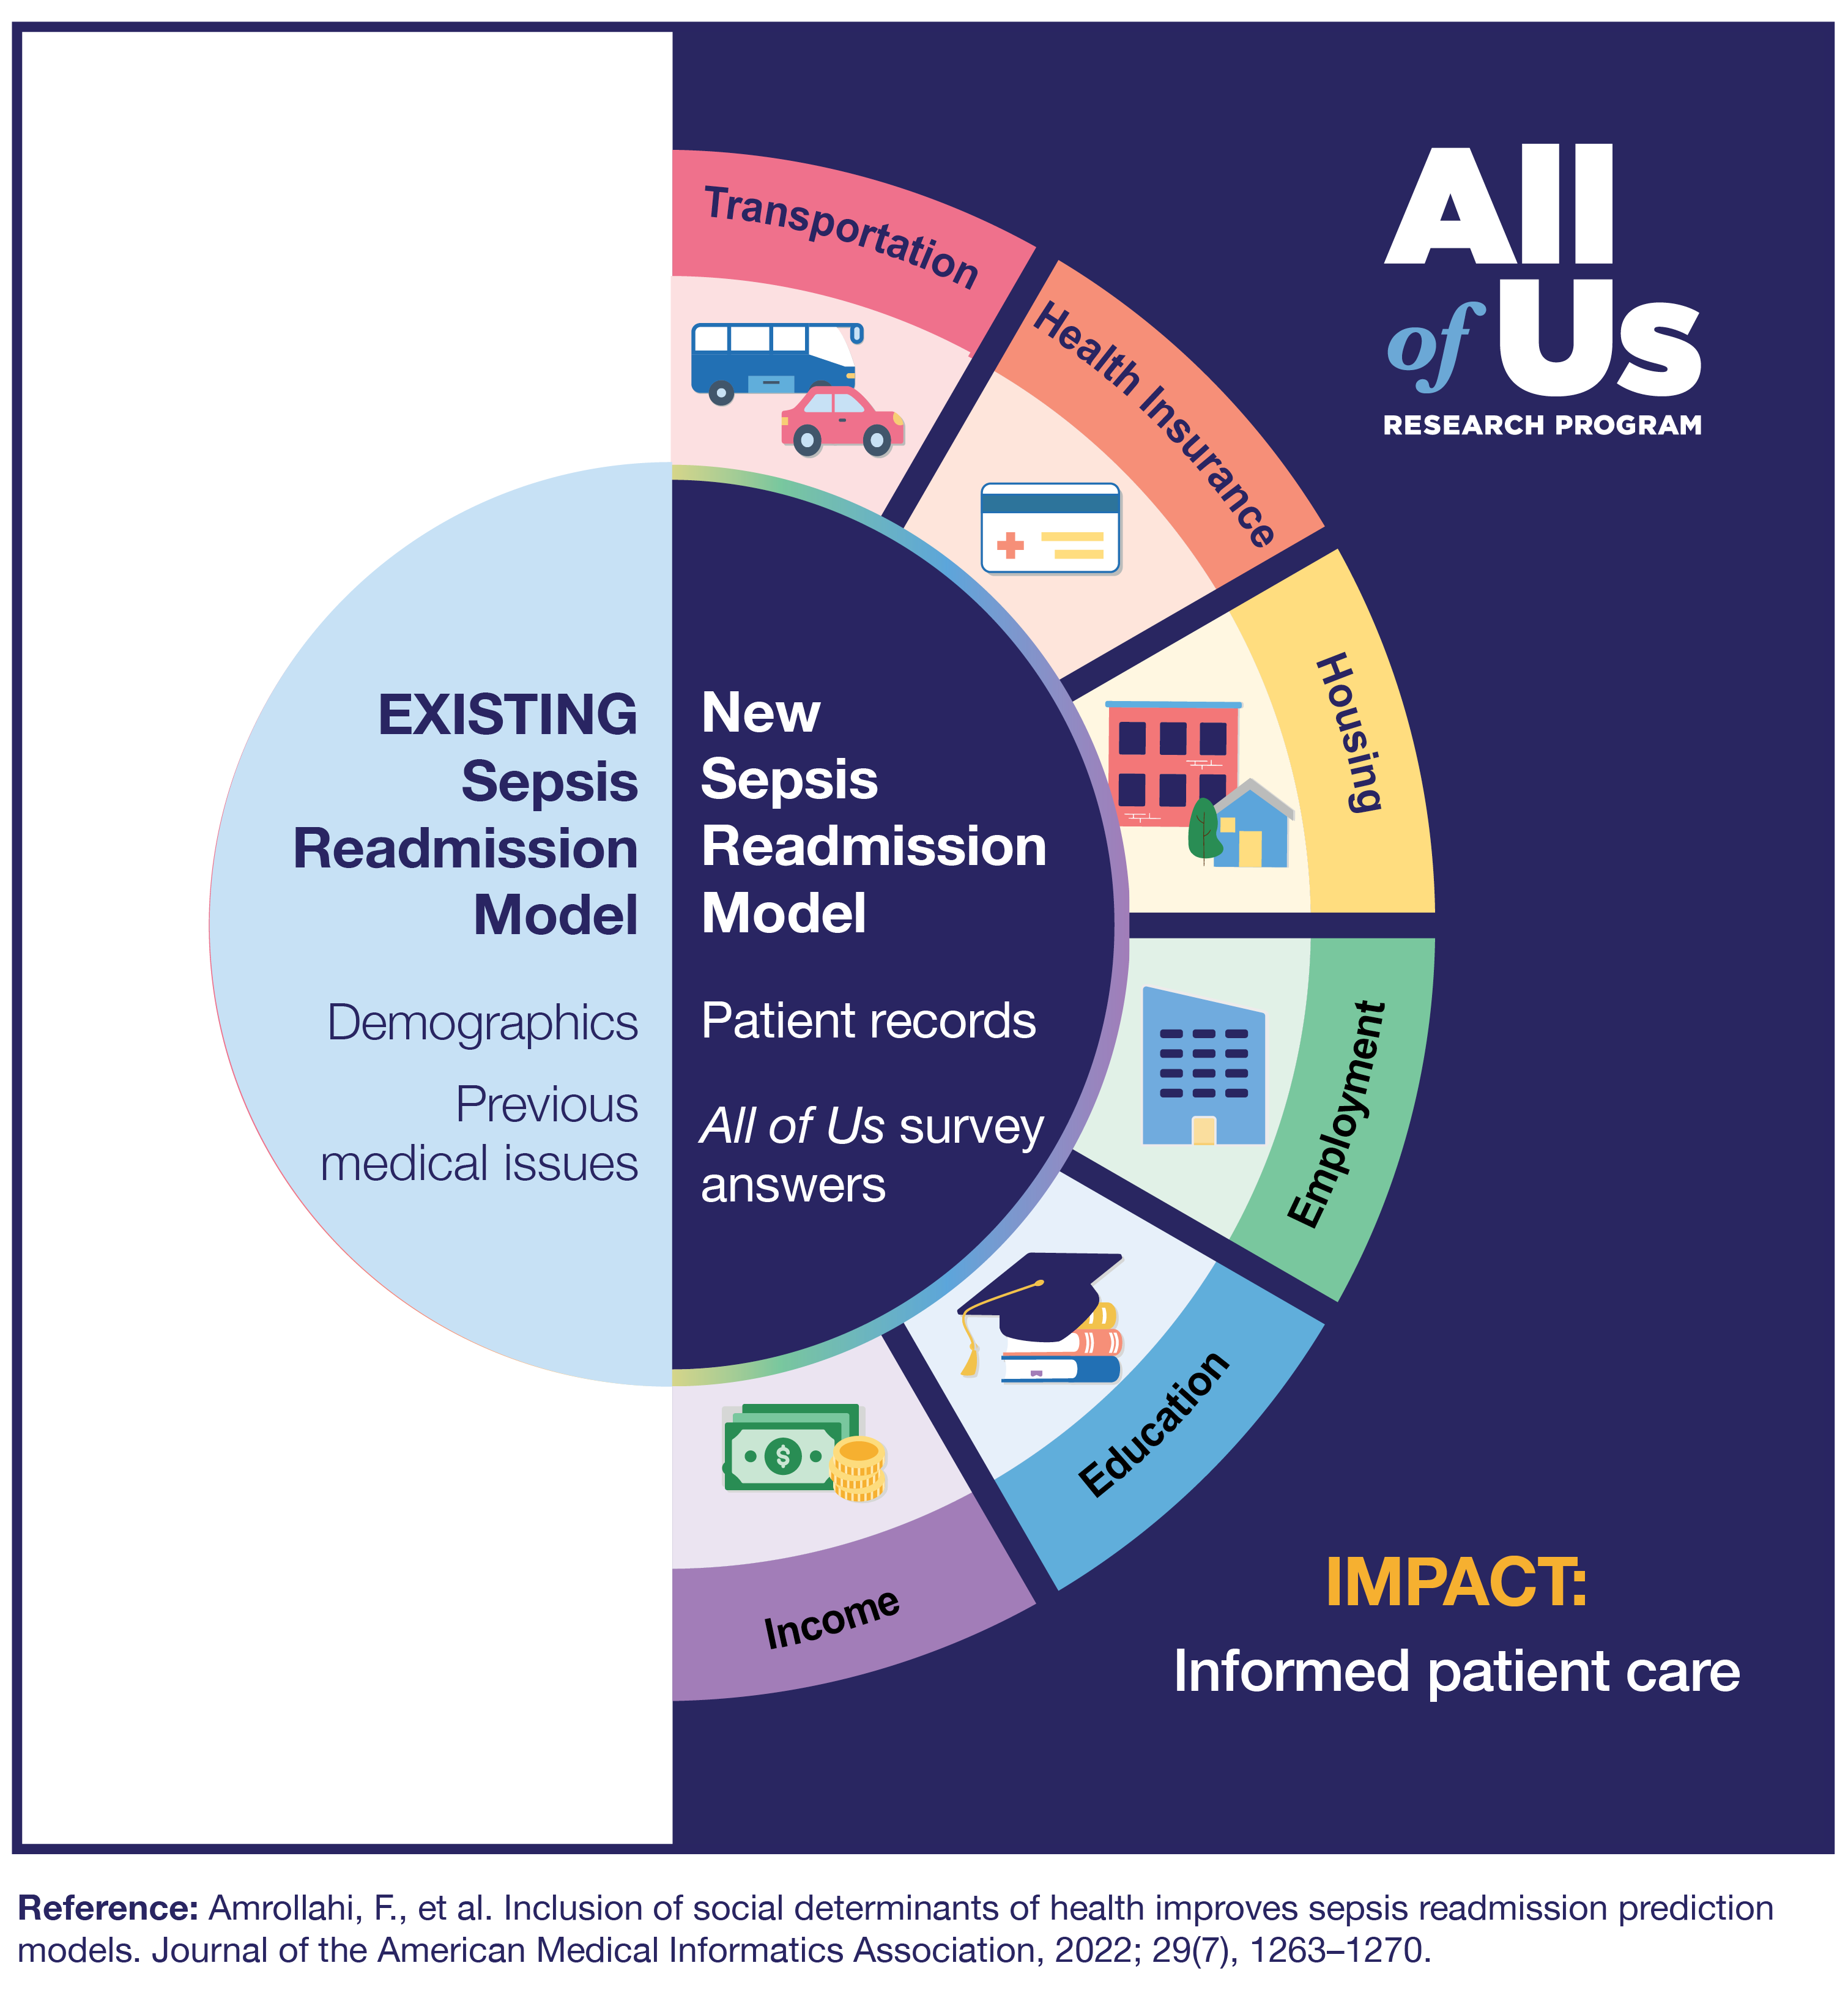 A diagram comparing the existing and new sepsis readmission models. The existing model includes demographics and data on previous medical issues. The new model includes patient records and All of Us survey answers covering transportation, health insurance, housing, employment, education, and income, the impact of which is informed patient care. Logo of the All of Us Research Program.